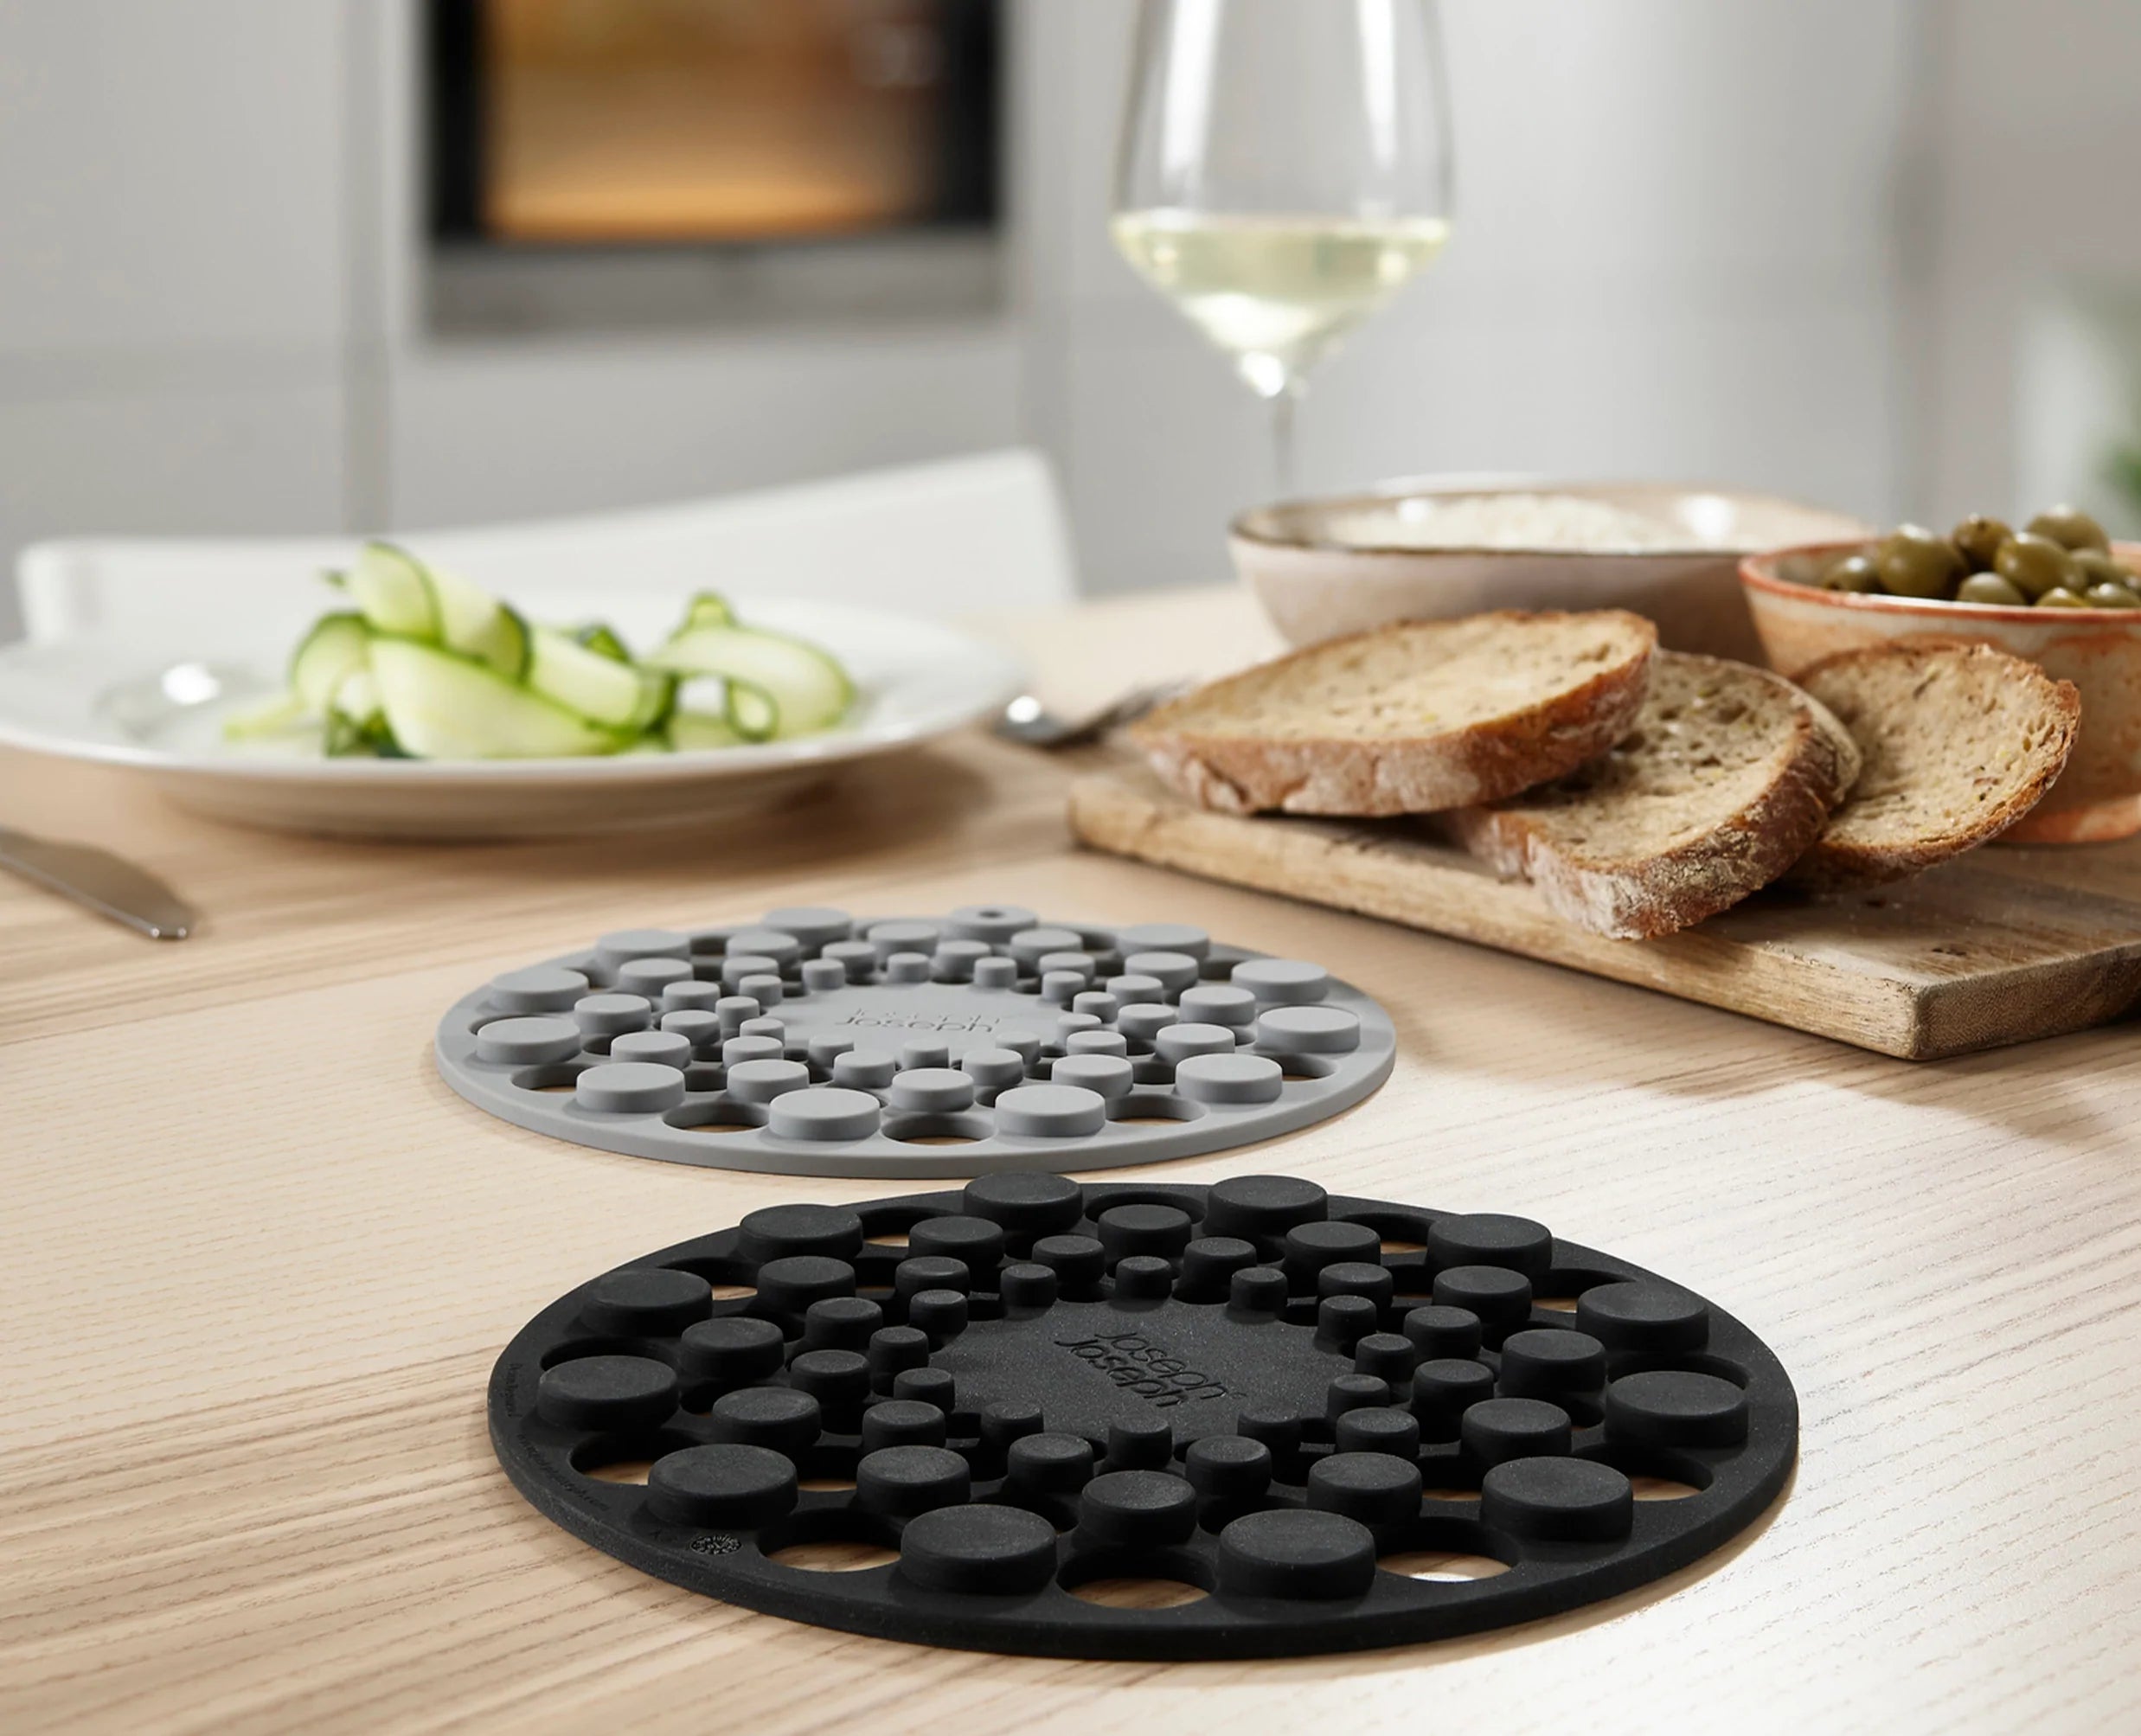 Spot-On™ Set of 2 Silicone Trivets - Image 5